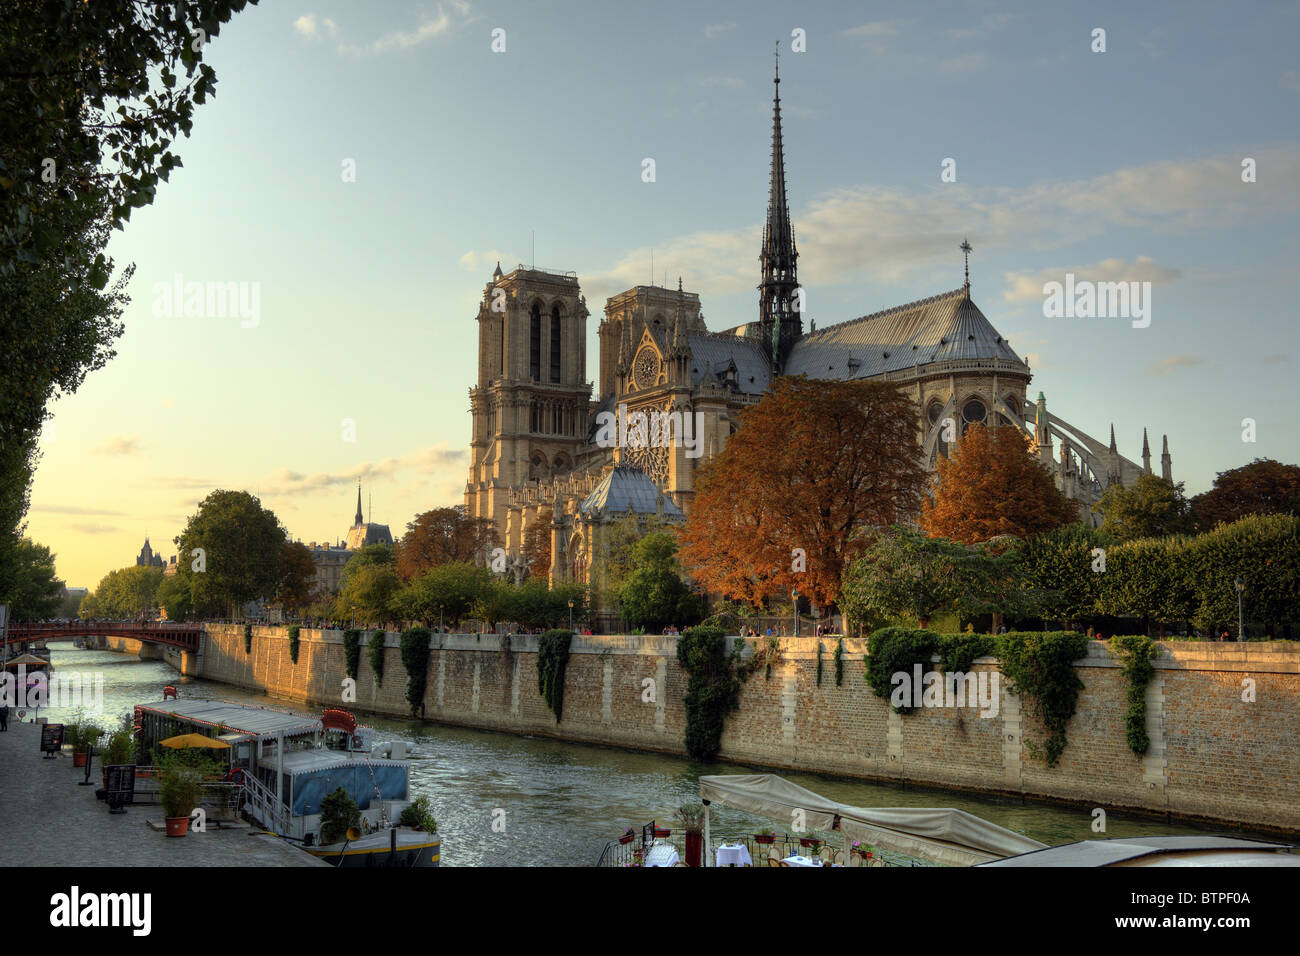 Notre-Dame cathedral in Paris Stock Photo